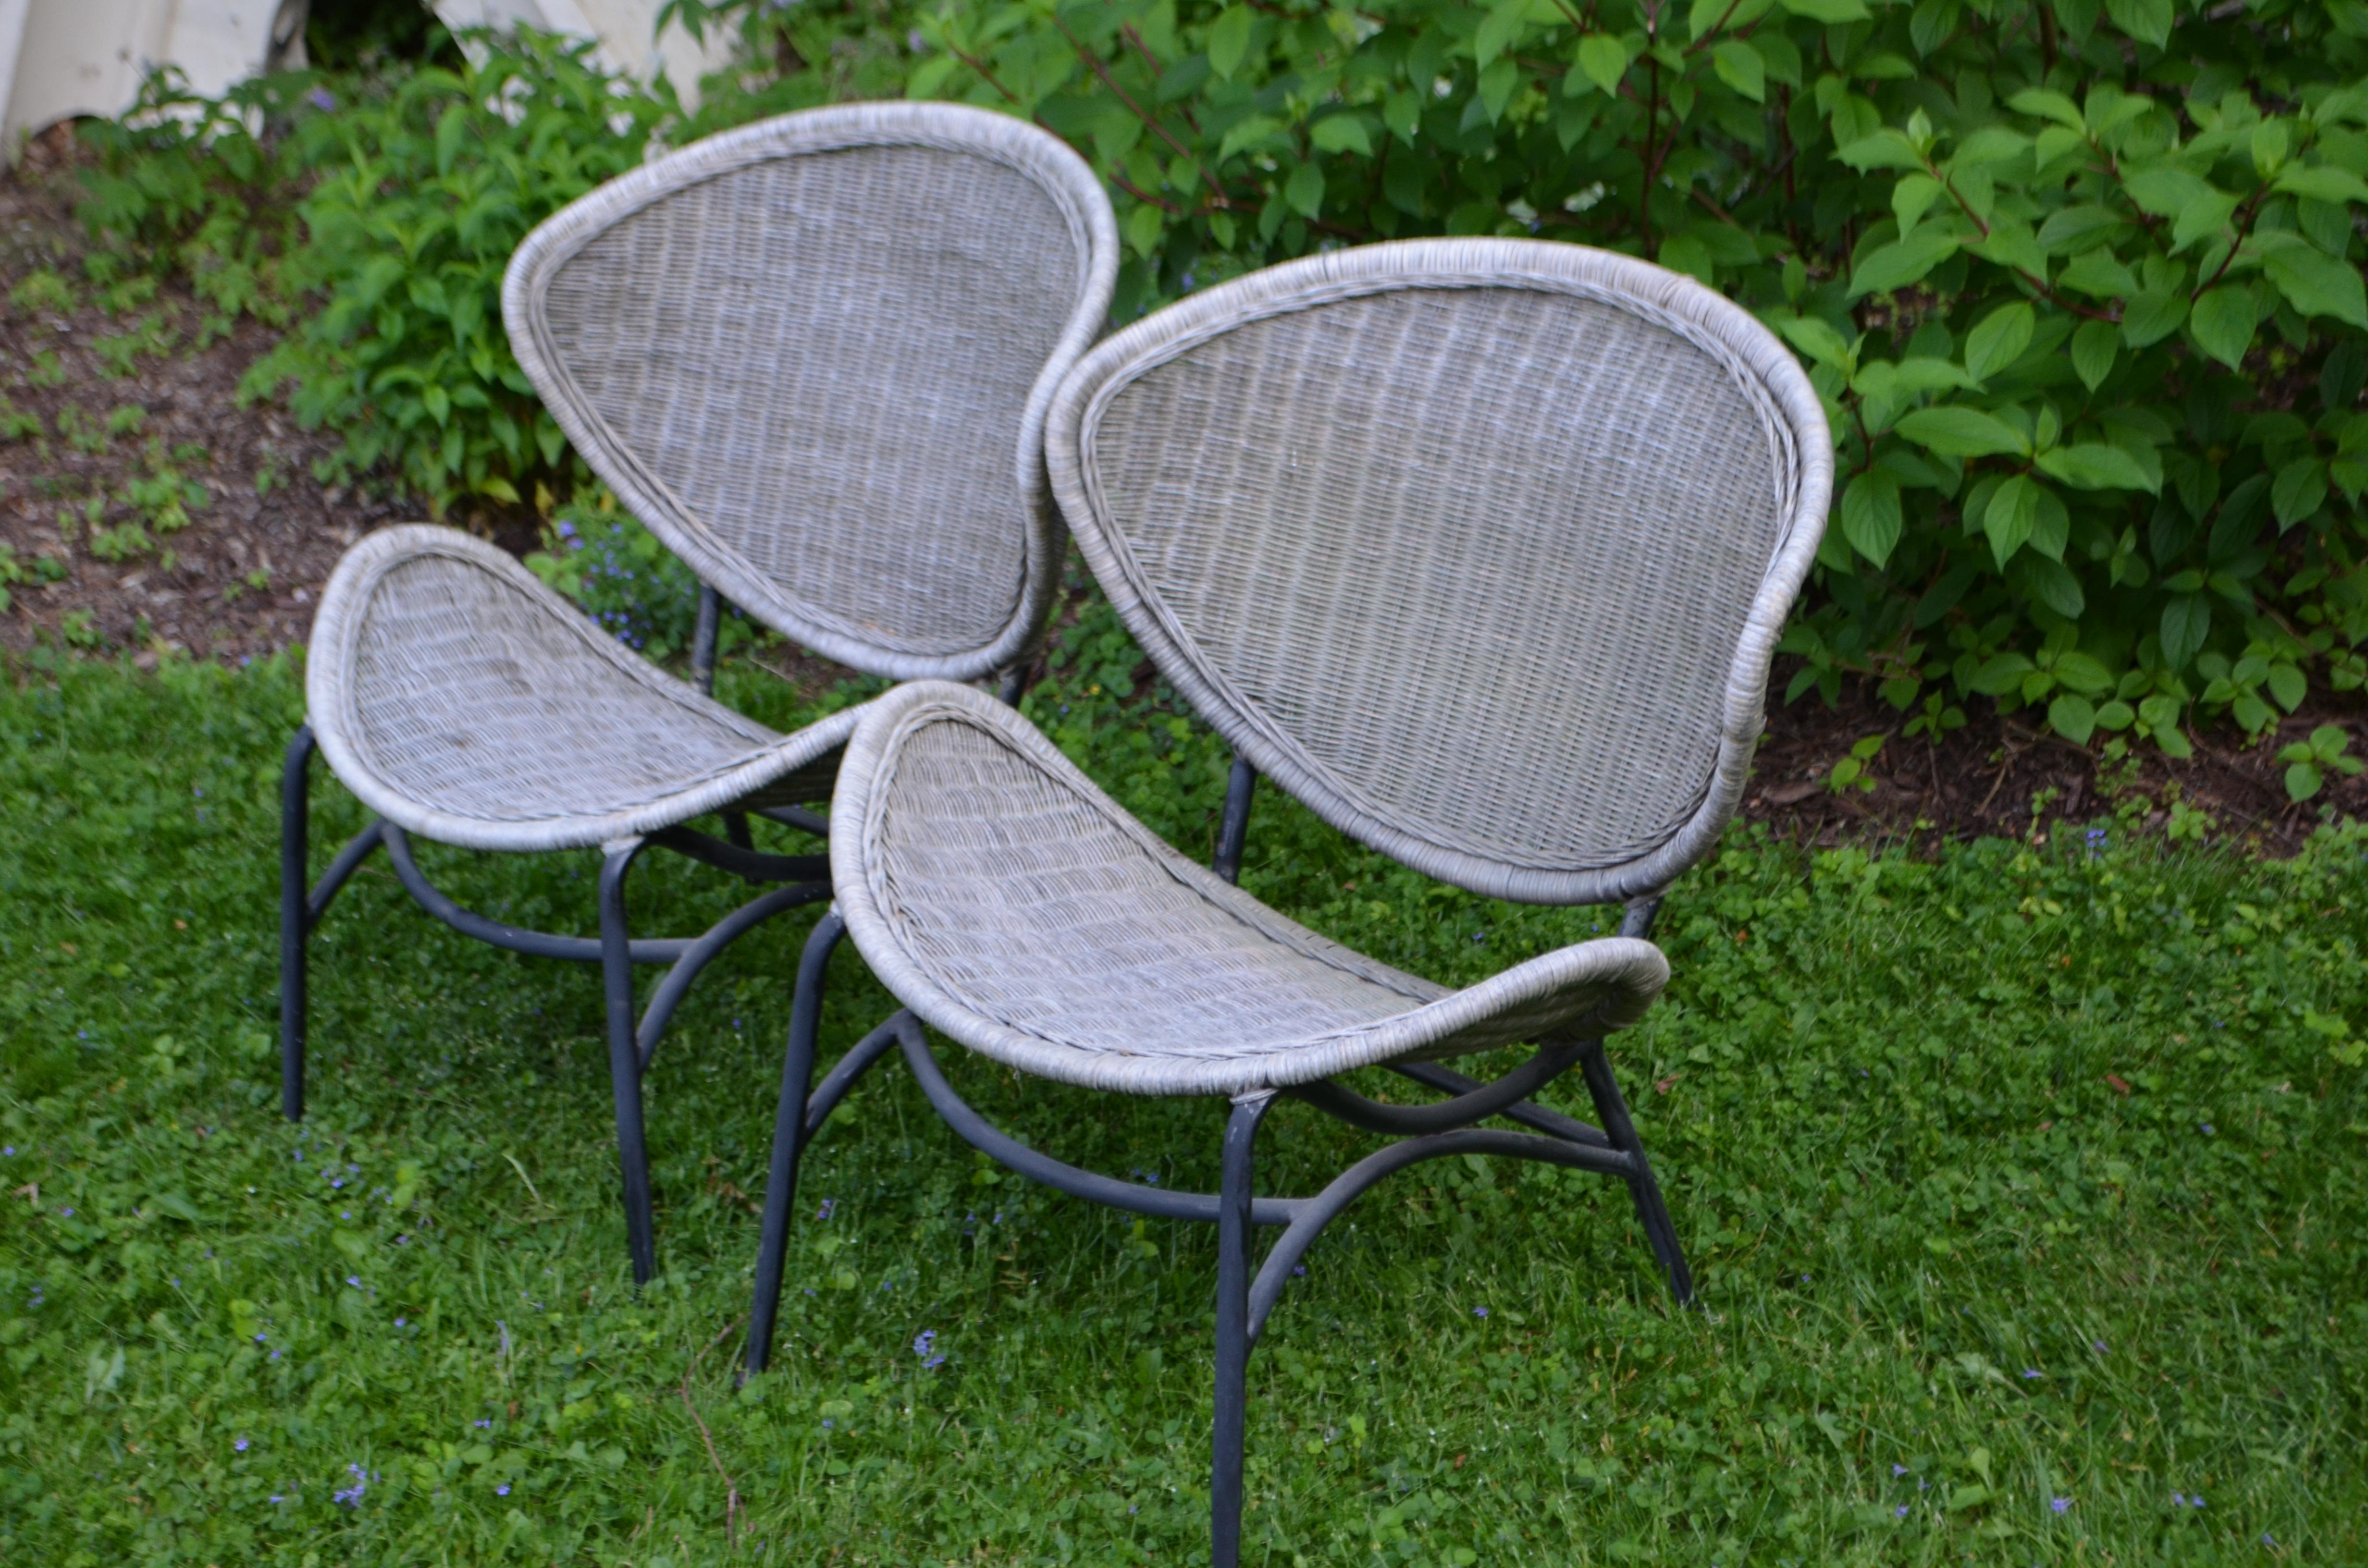 Salterini clamshell chairs in natural wicker with black-painted steel frame. A Classic pair. Very good condition. Great for your mid-century style design, patio or porch. Beach house, woodland cabin, seaside cottage. Style and comfort combined.